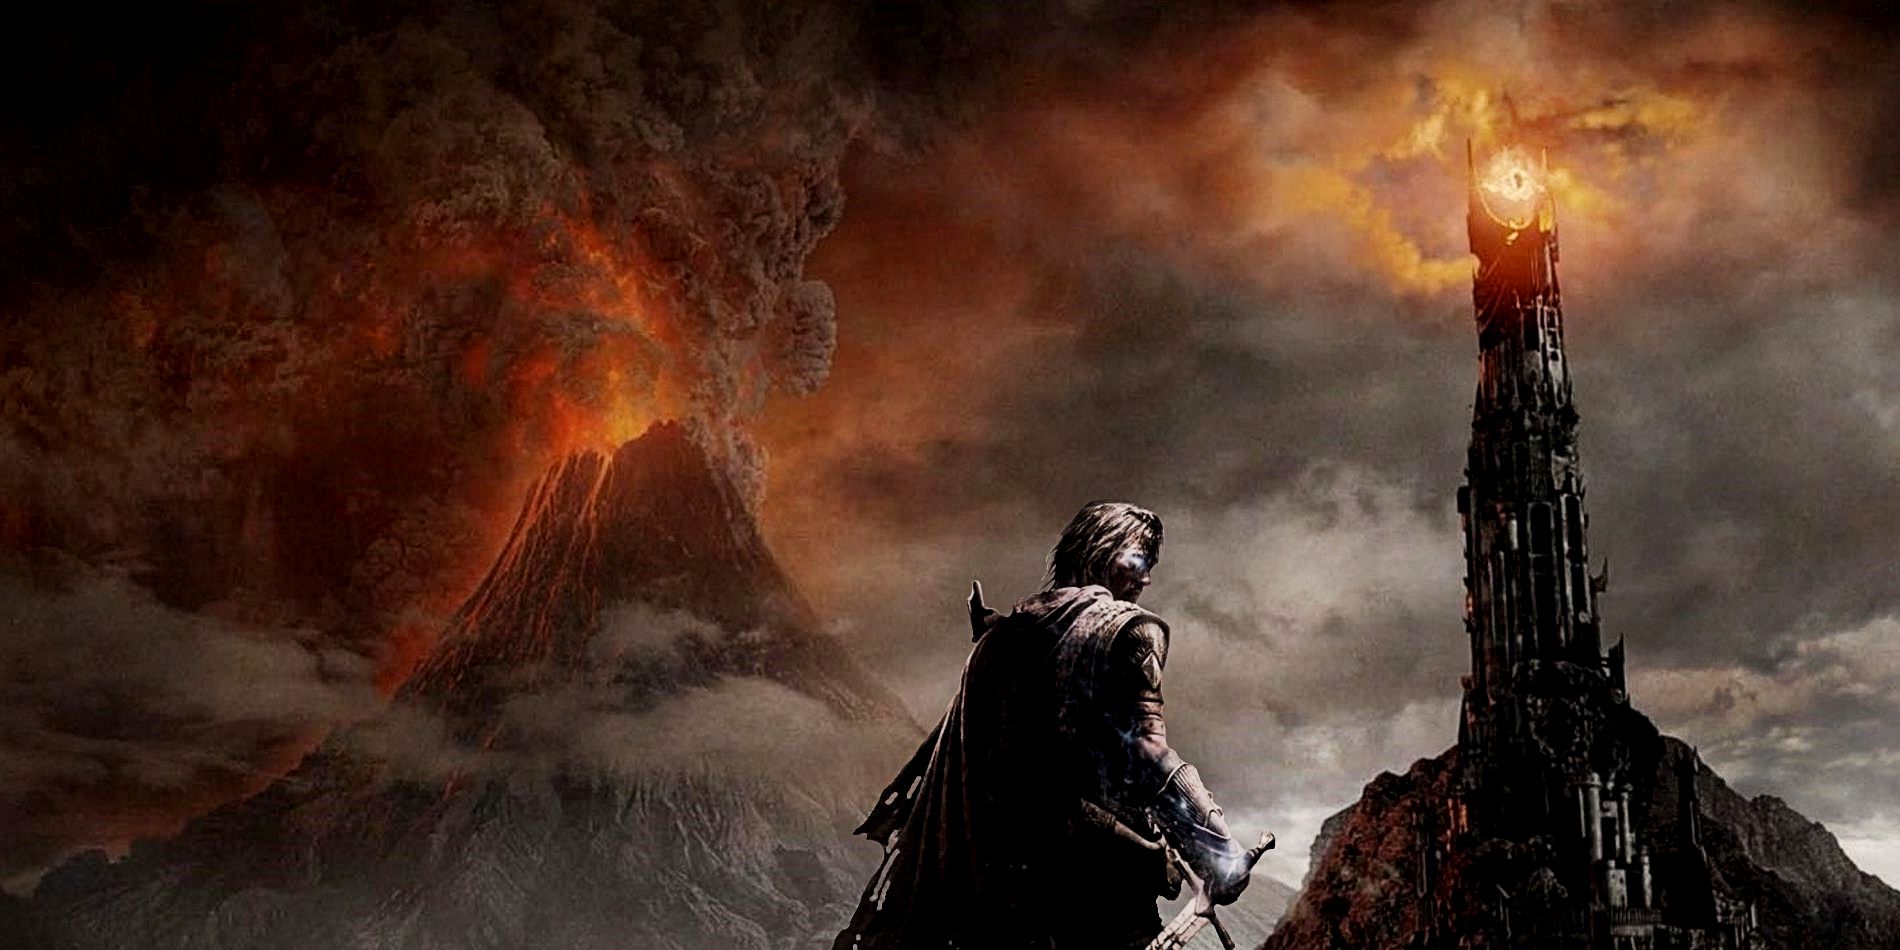 Wallpaper Lord of The Rings, Mordor, Mount Doom, Eye of Sauron for mobile  and desktop, section фантастика, resolution 1920x1080 - download